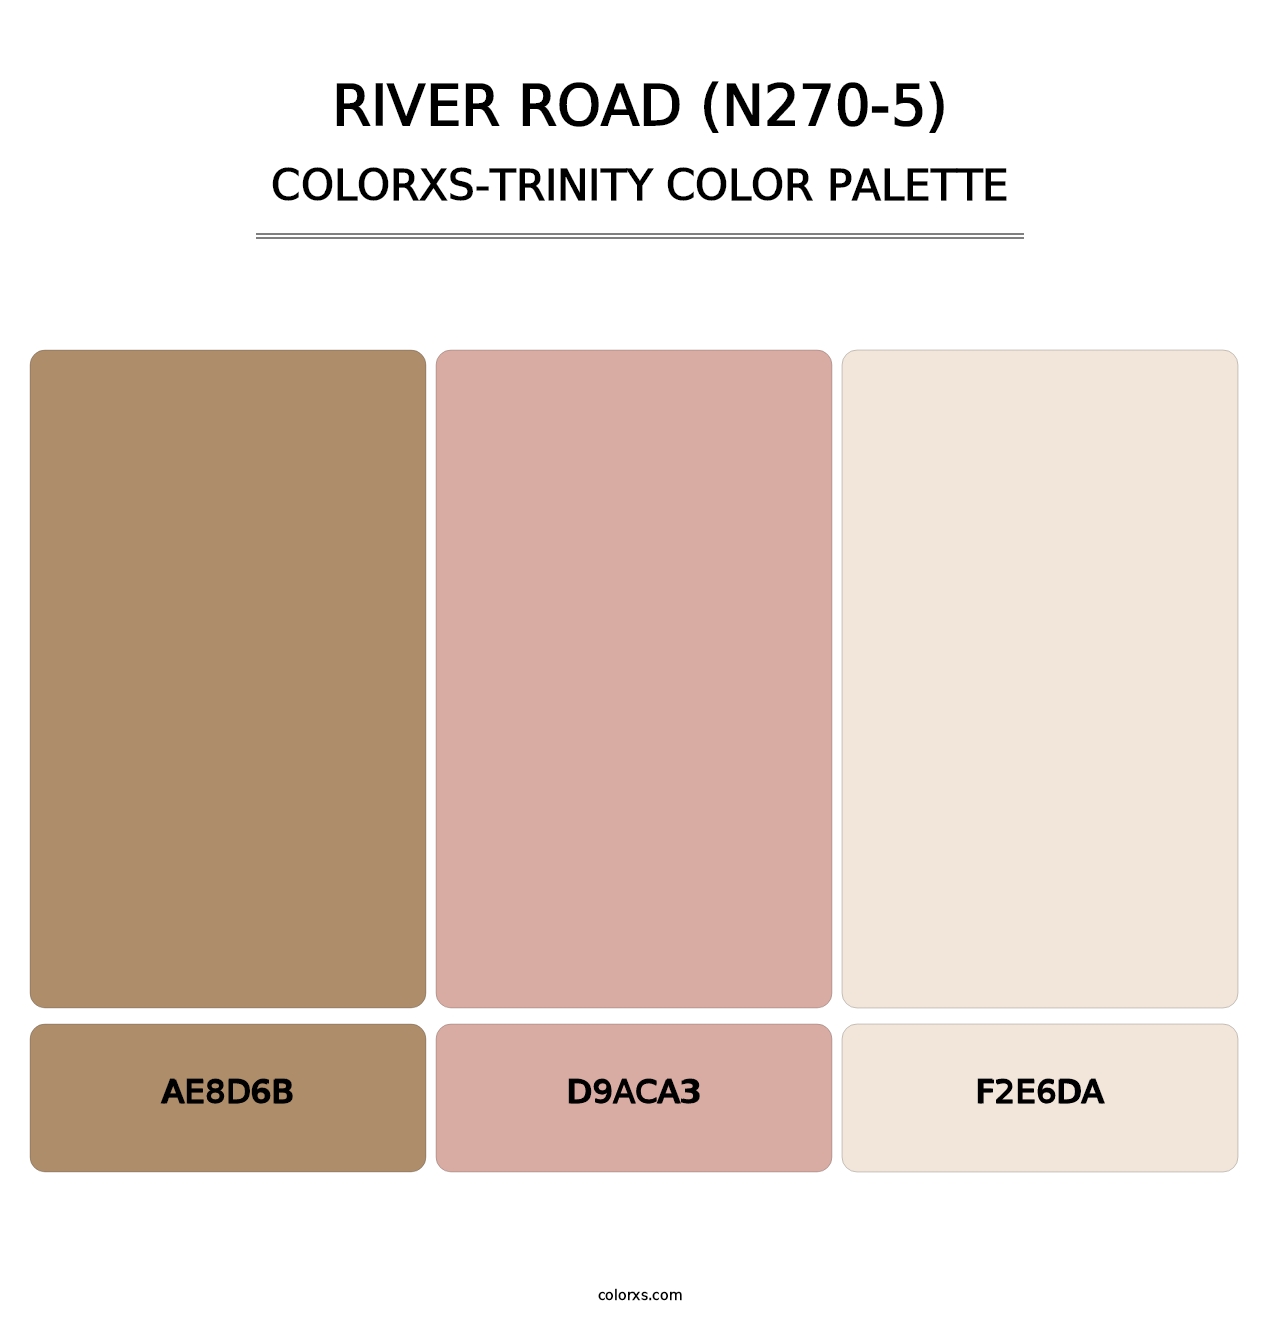 River Road (N270-5) - Colorxs Trinity Palette